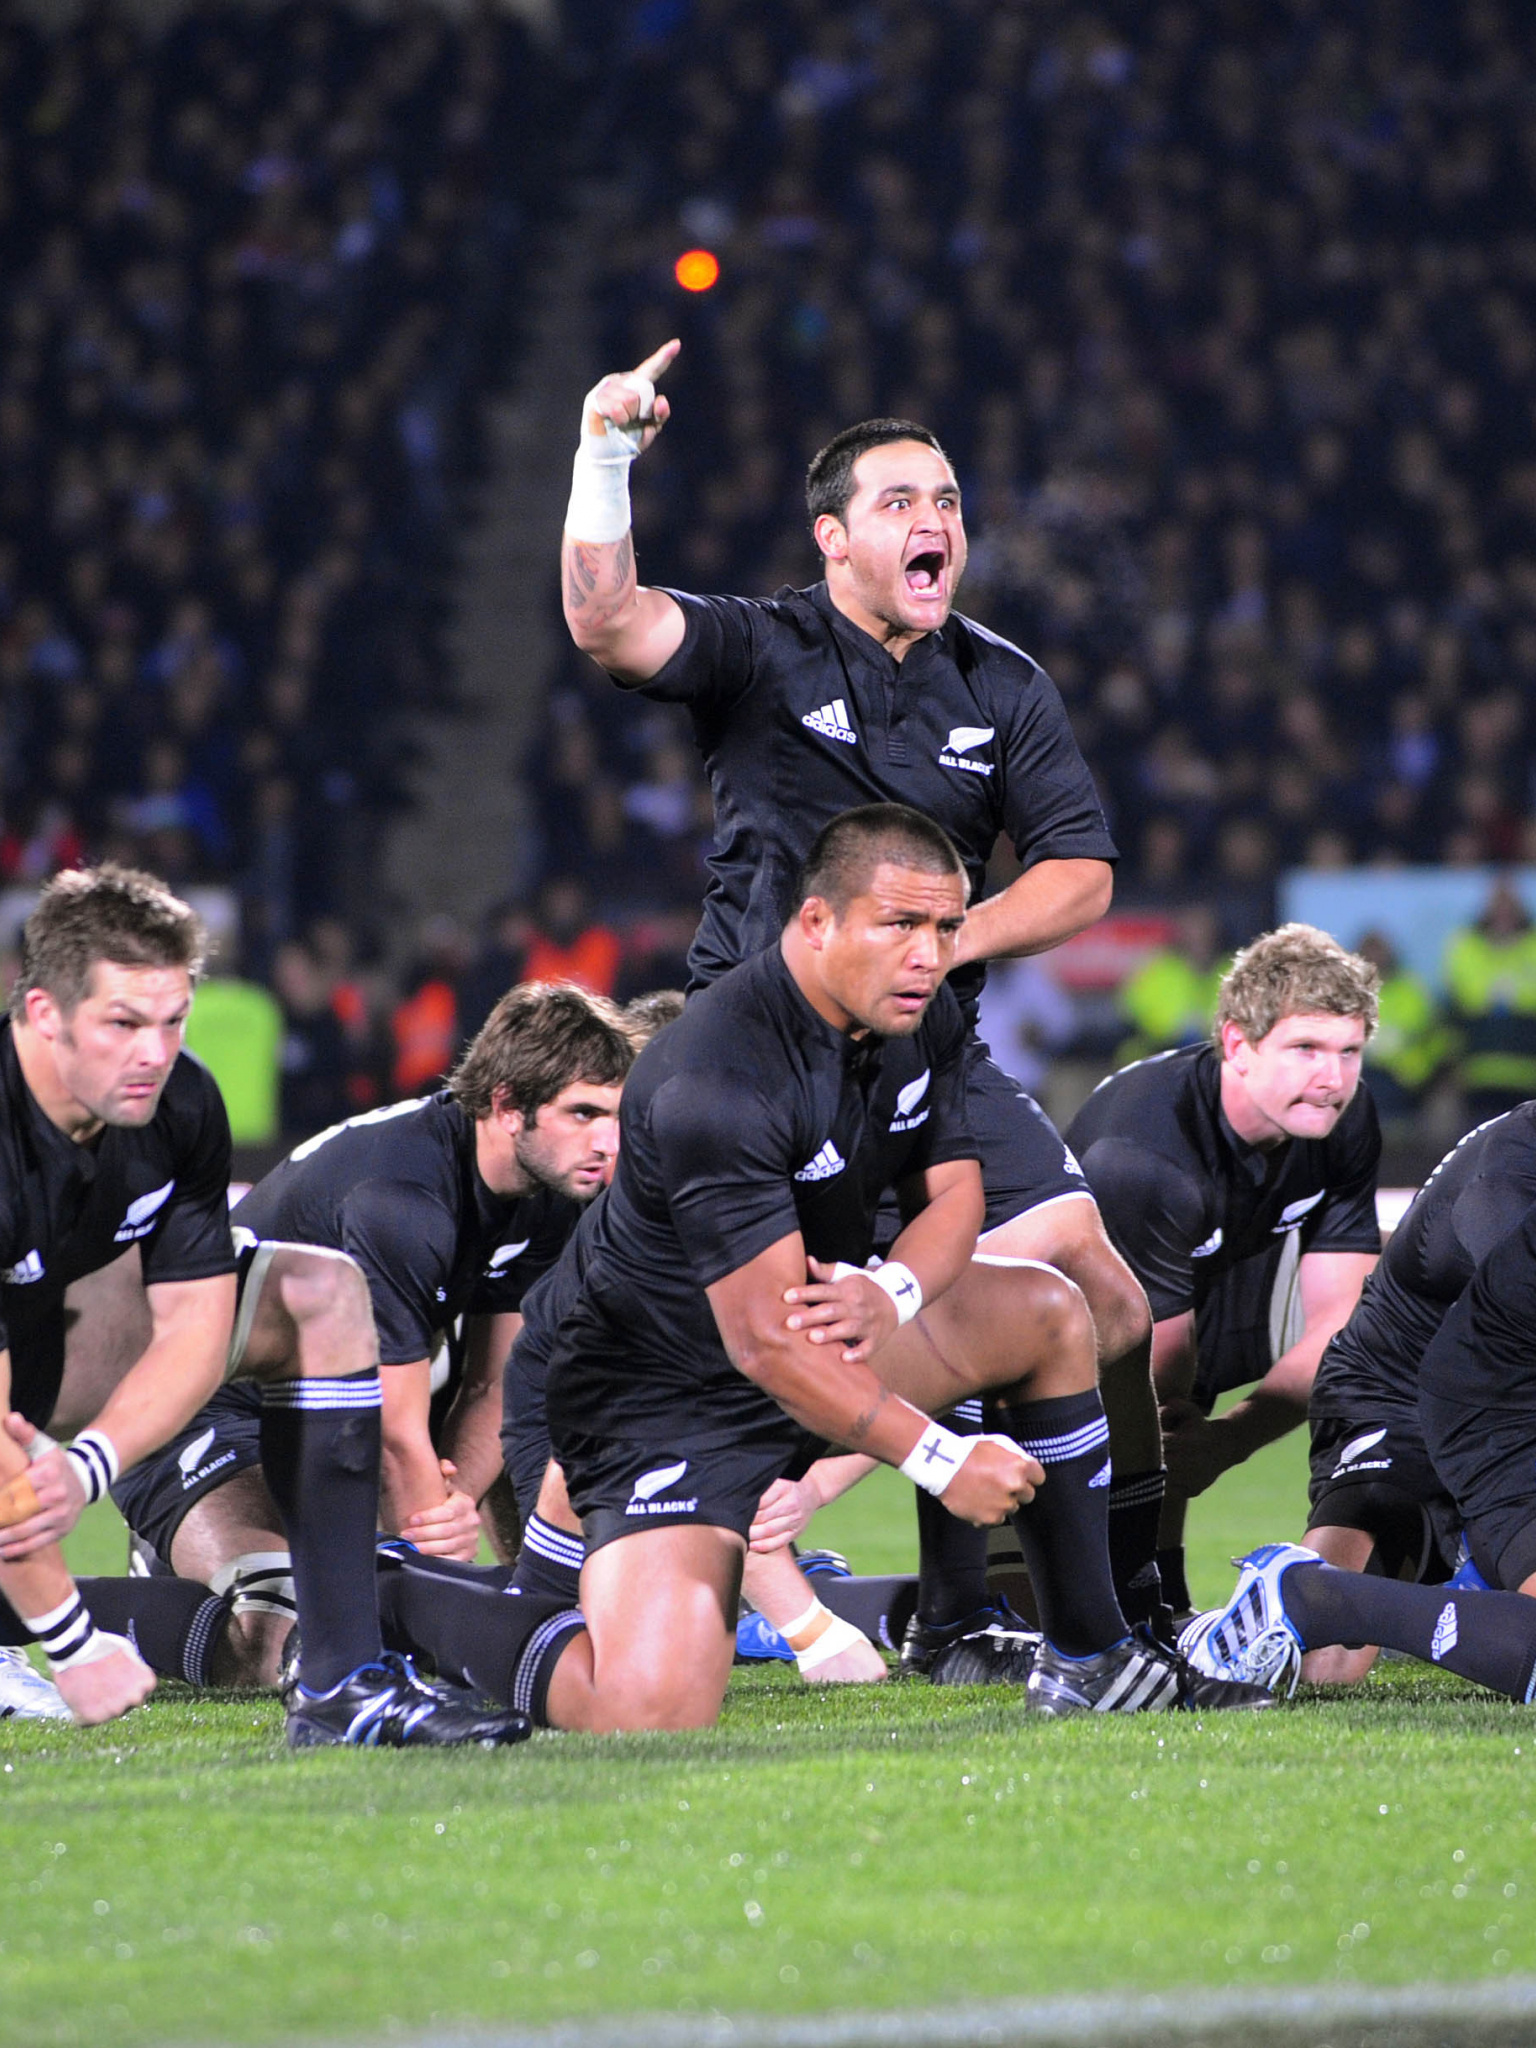 New Zealand All Blacks wallpaper, Haka tradition, Stunning landscapes, Rugby culture, 1540x2050 HD Phone